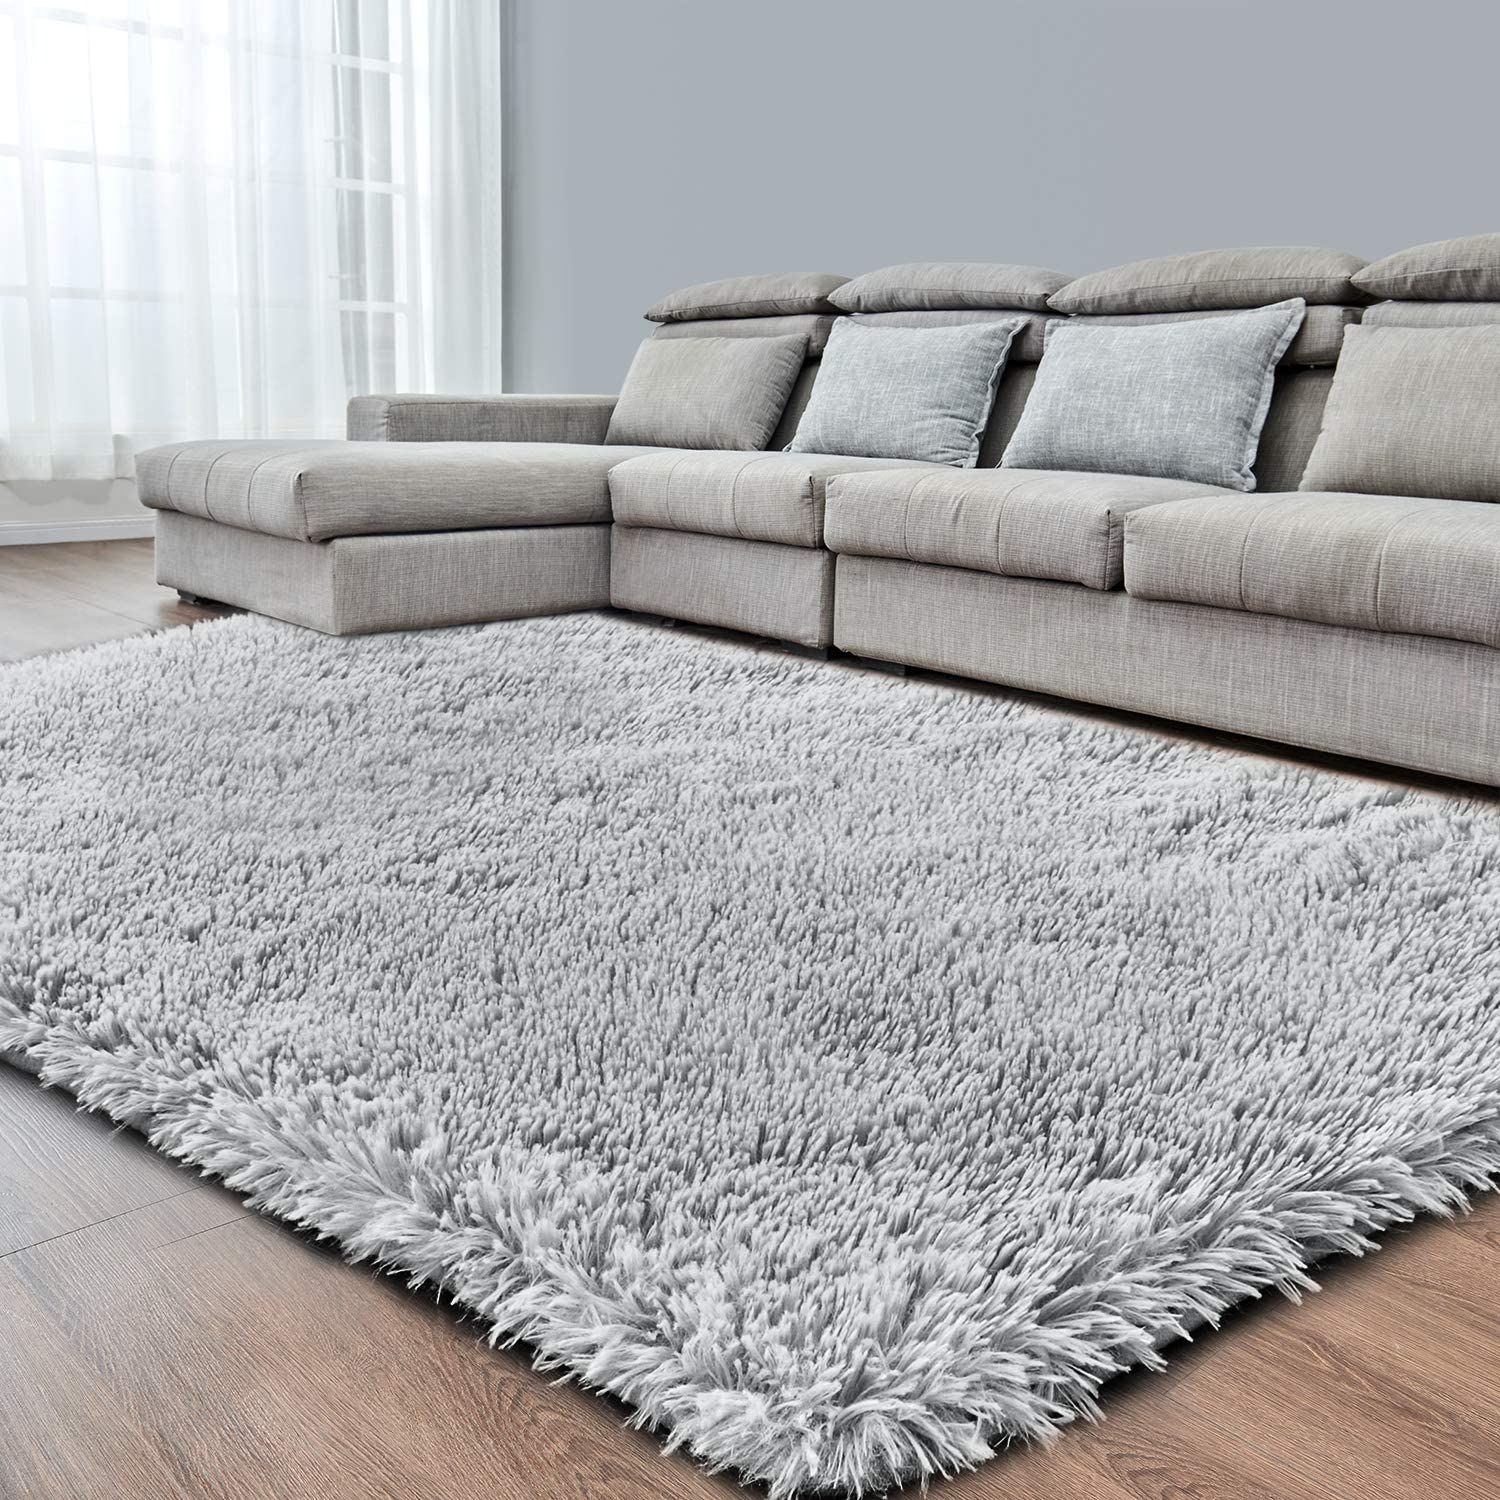 Ophanie Rugs for Bedroom Living Room, 4x5.3 Area Rug Grey Fluffy Fuzzy Soft  Plus